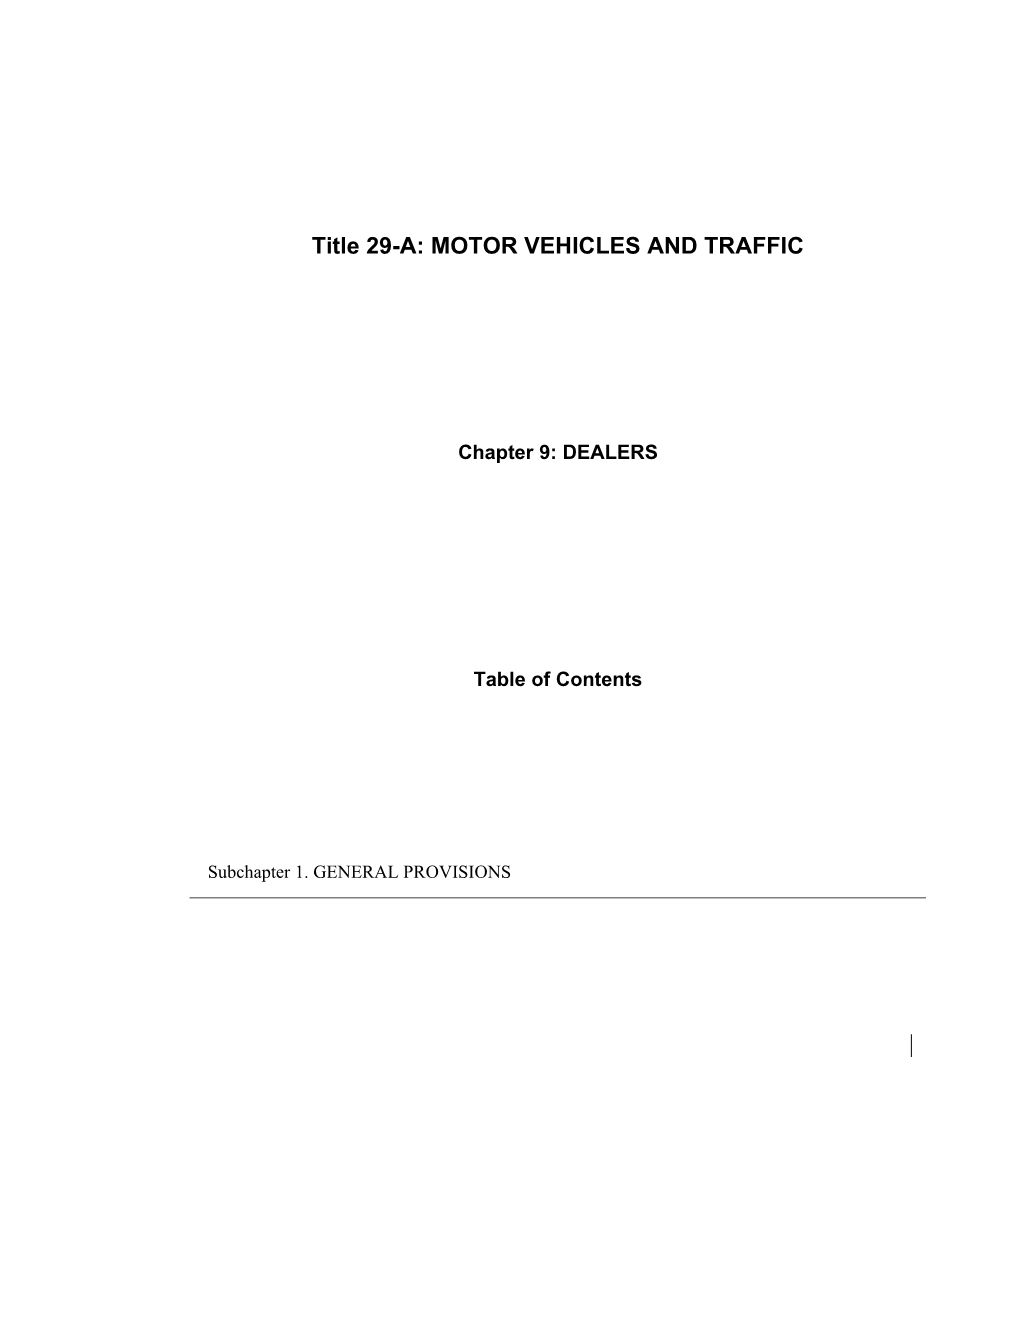 Title 29-A: MOTOR VEHICLES and TRAFFIC